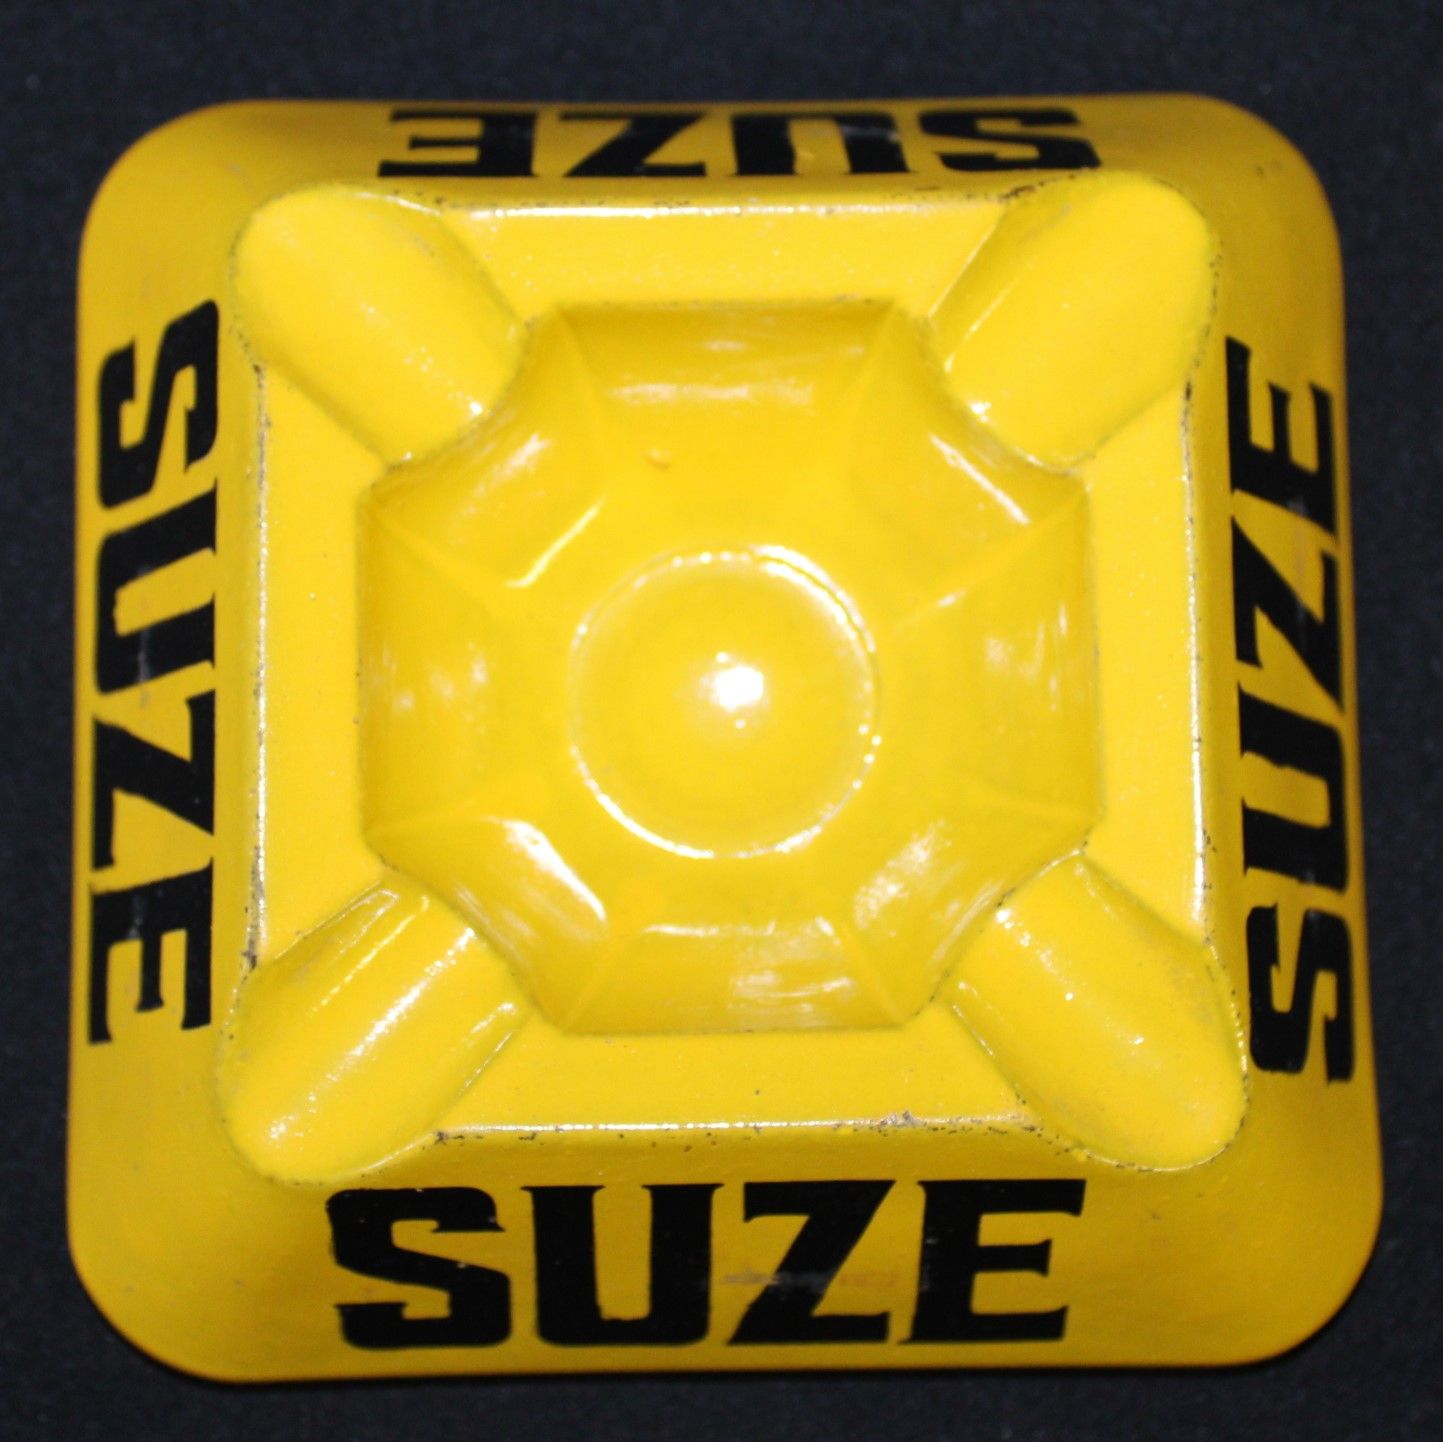 Null Square ashtray, "Suze", in glass, wear, 11x4